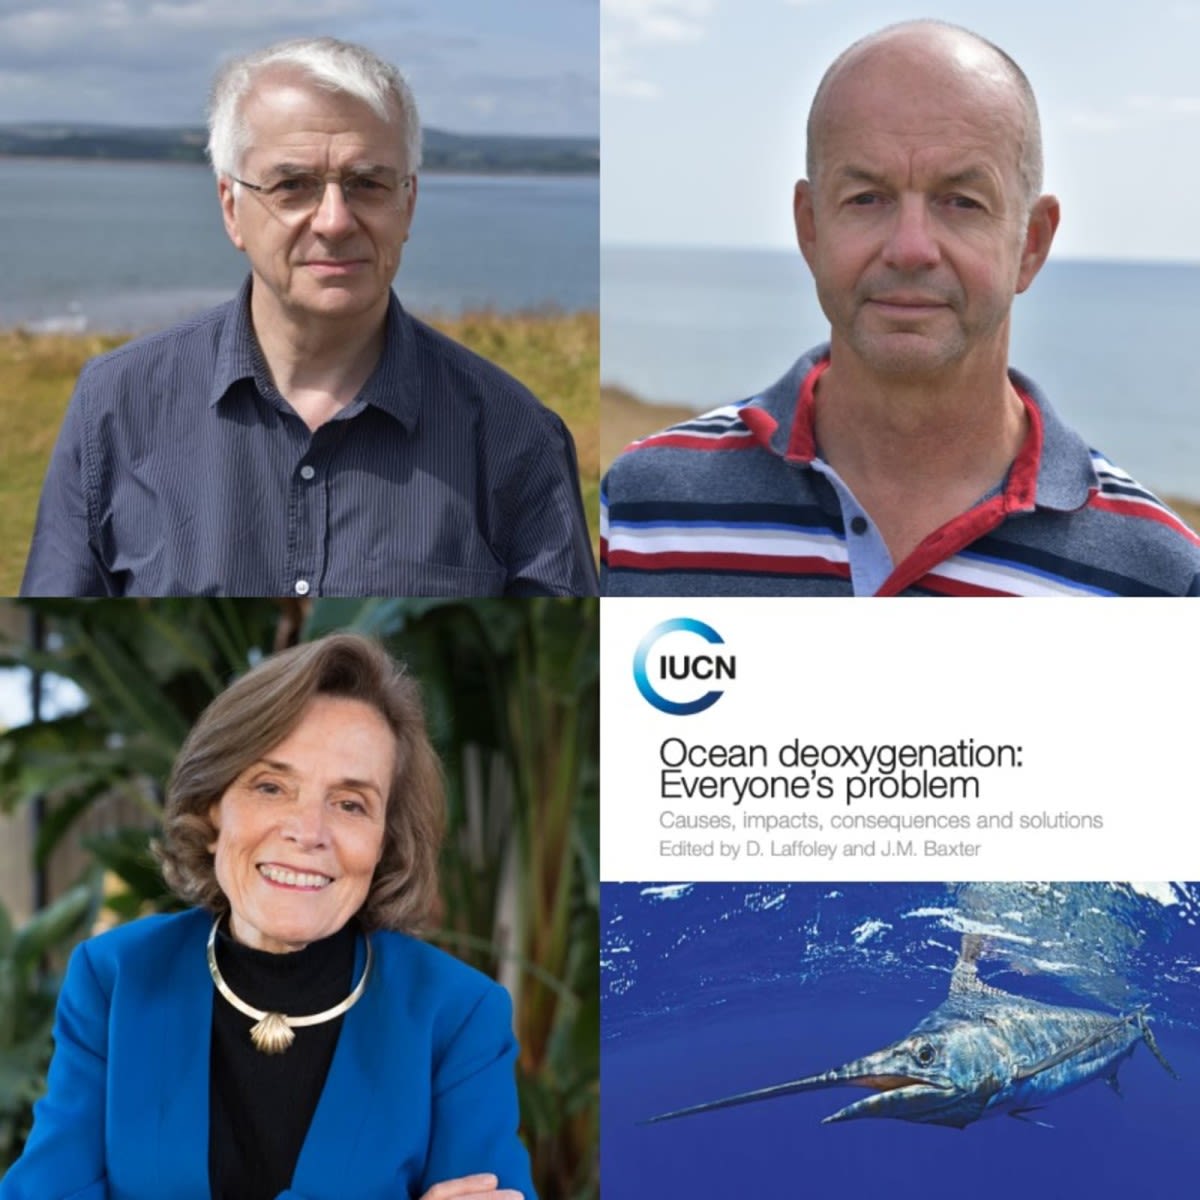 A collage of Dan Laffoley, Sylvia Earle, John Baxter and a poster from the IUCN around Ocean deoxygenation